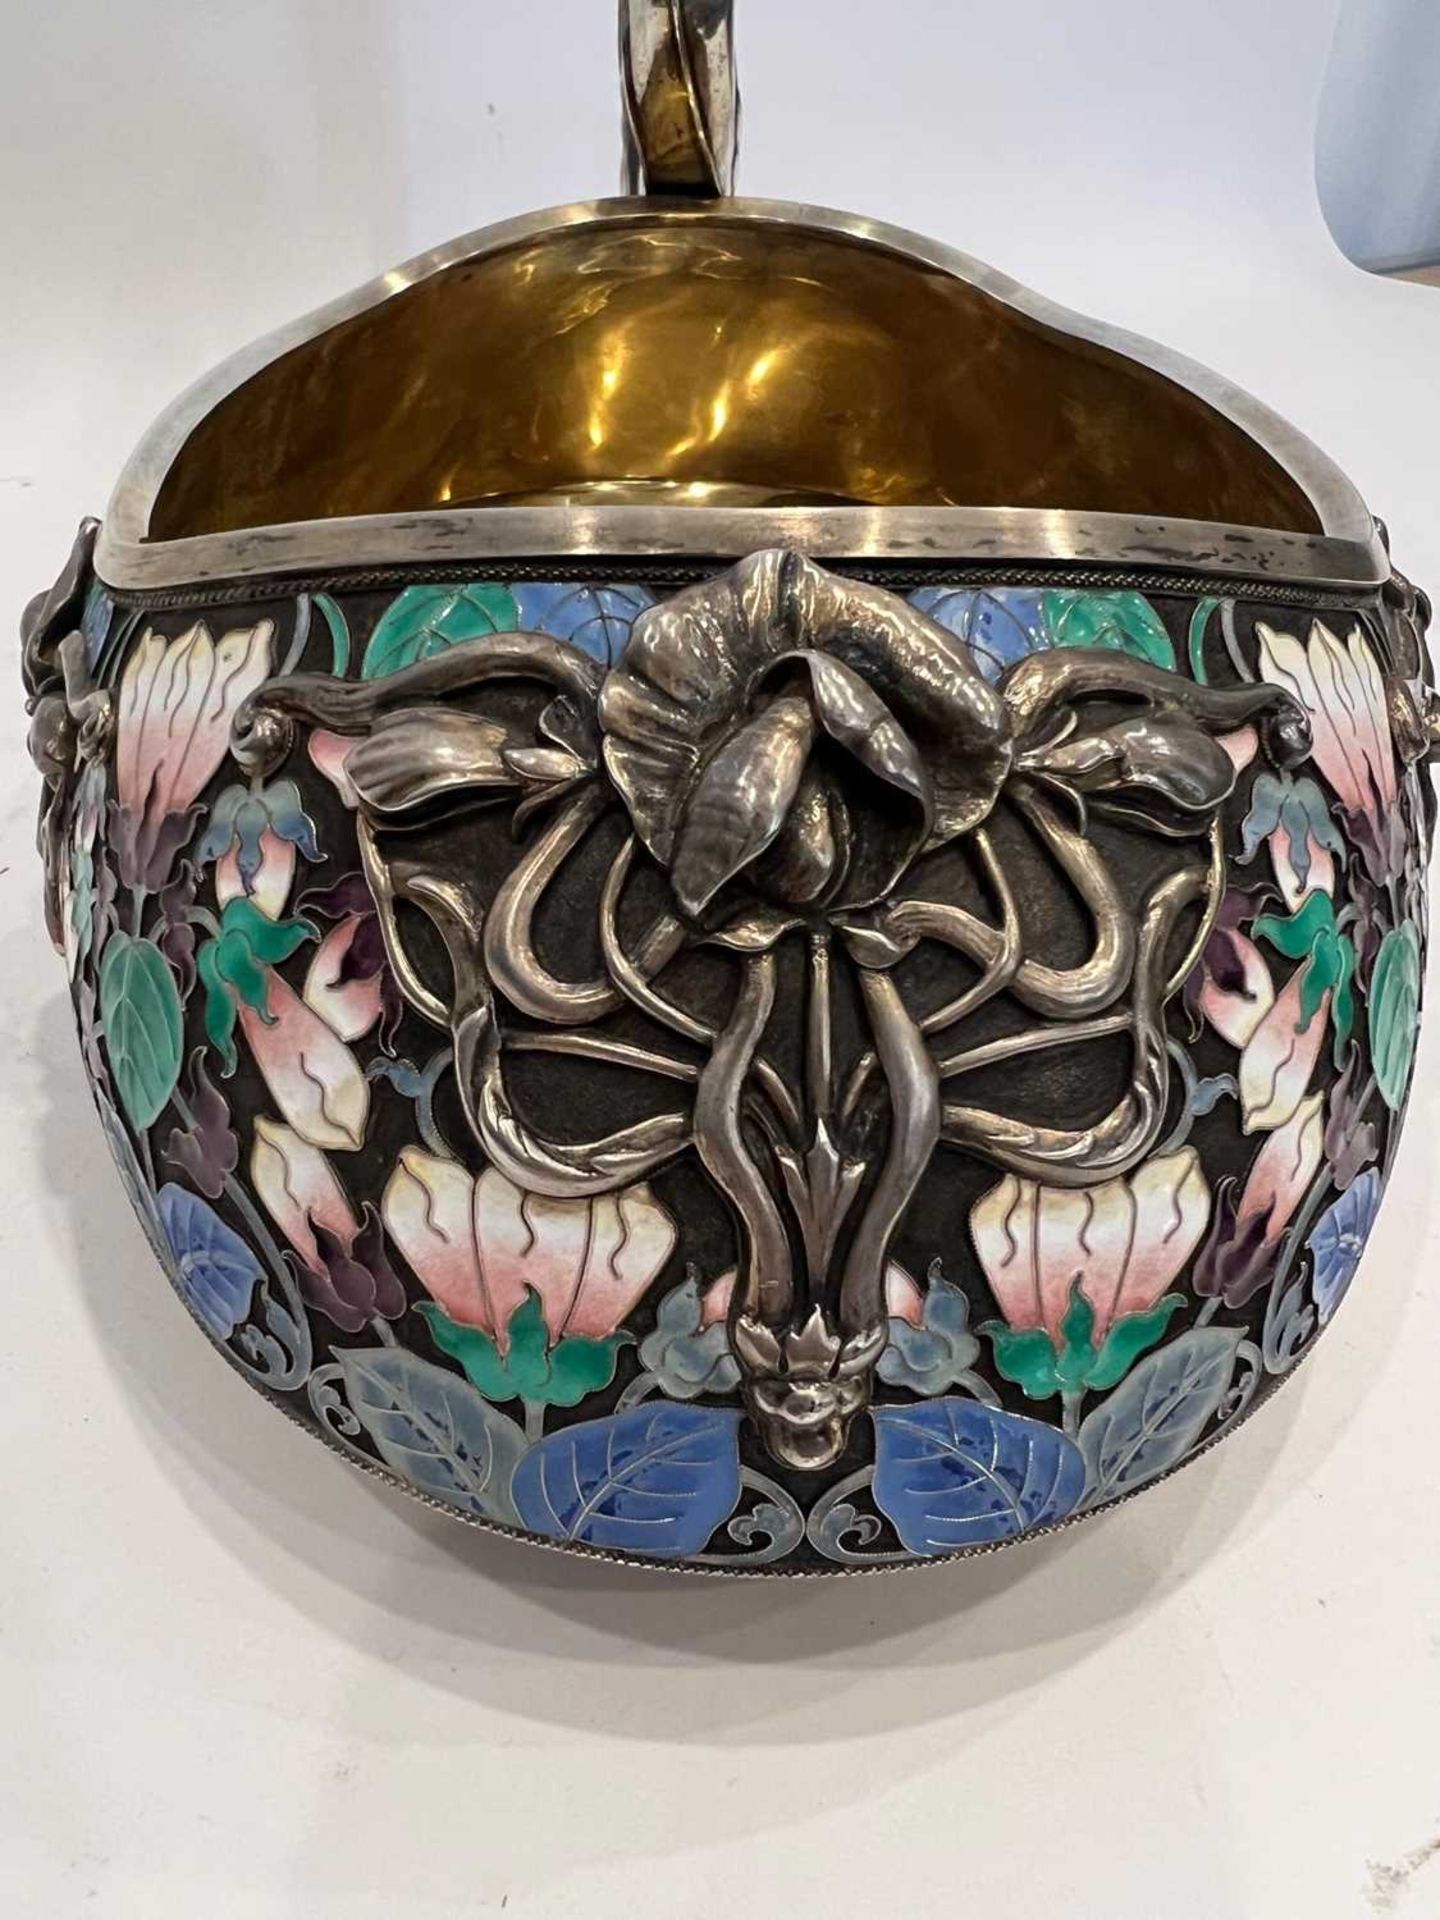 A MASSIVE EARLY 20TH CENTURY RUSSIAN SILVER AND ENAMEL KOVSH IN THE FORM OF A SWAN - Image 22 of 28